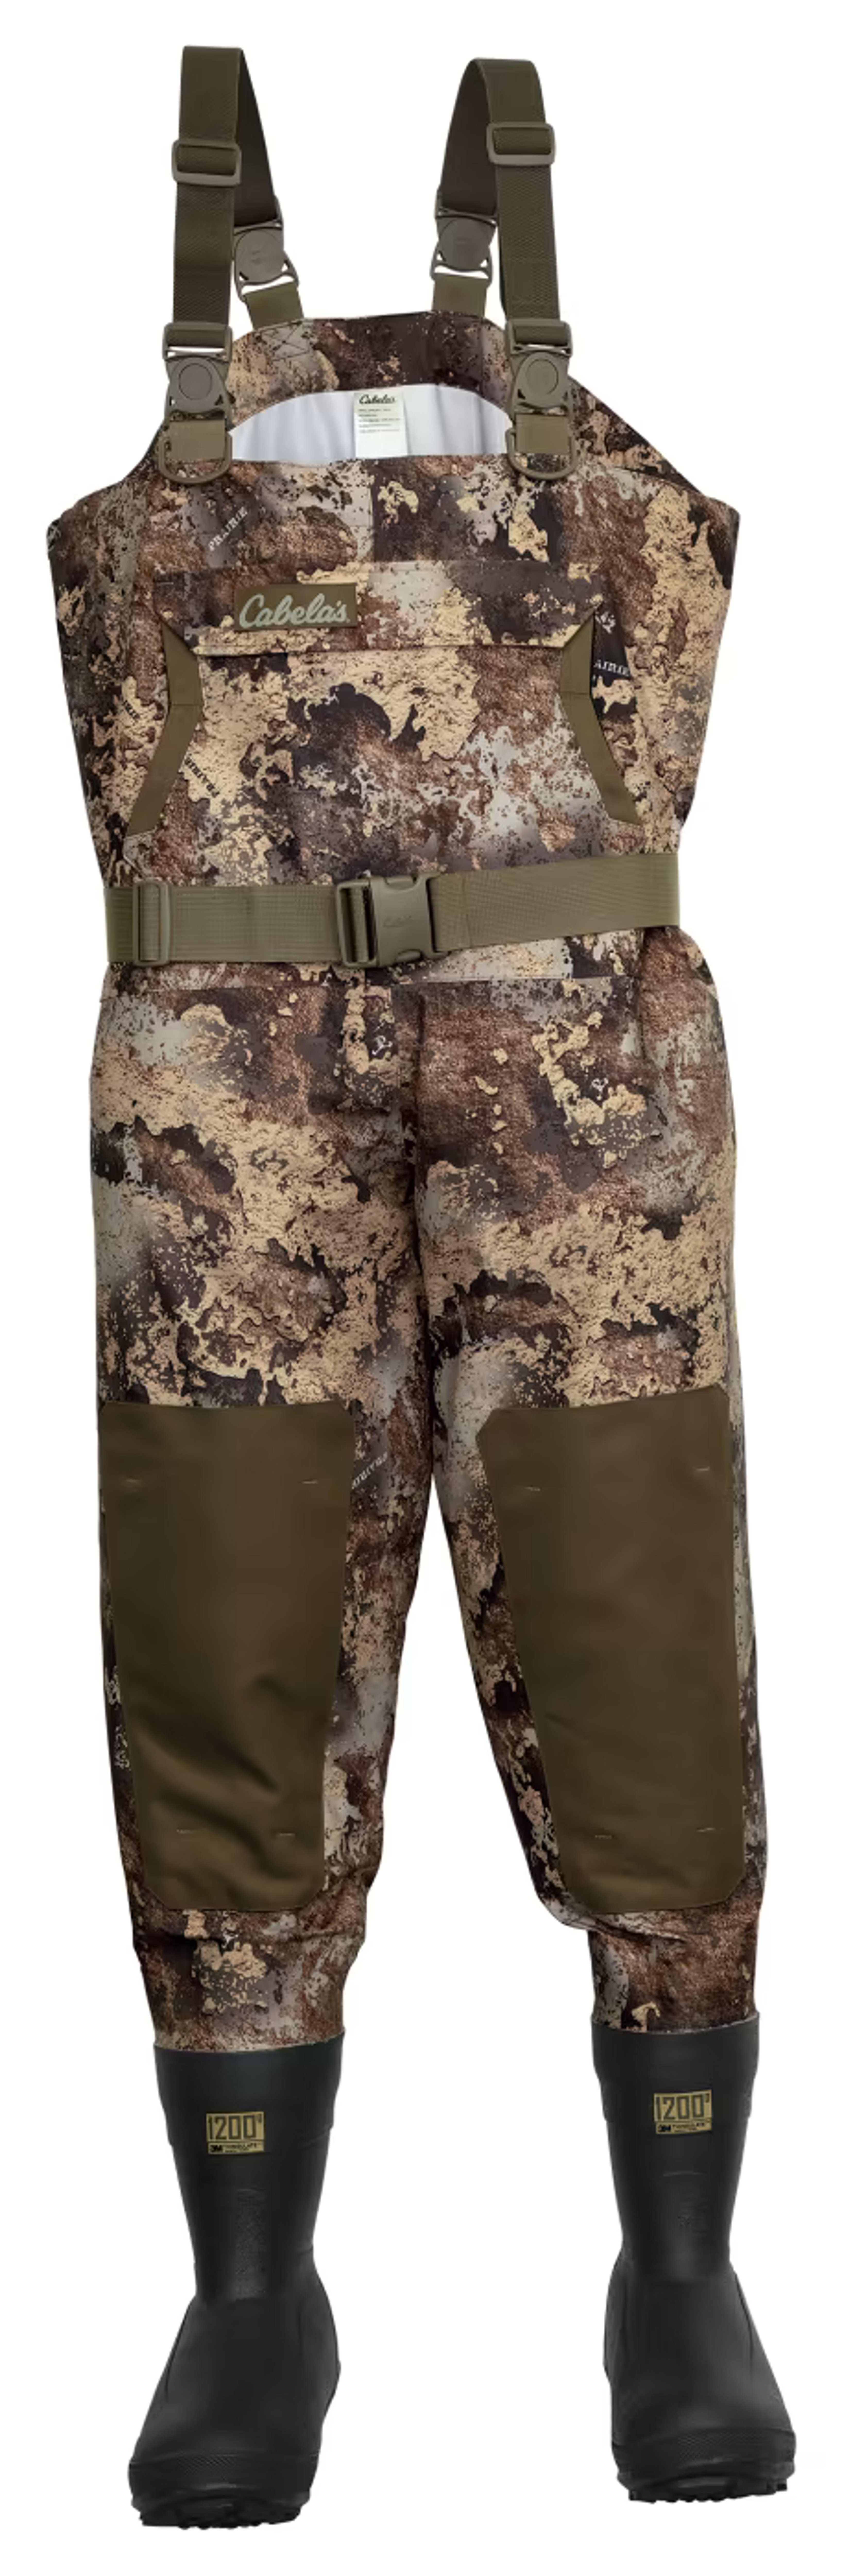 Cabela's 4MOST DRY-PLUS Breathable Chest Hunting Waders for Men | Cabela's